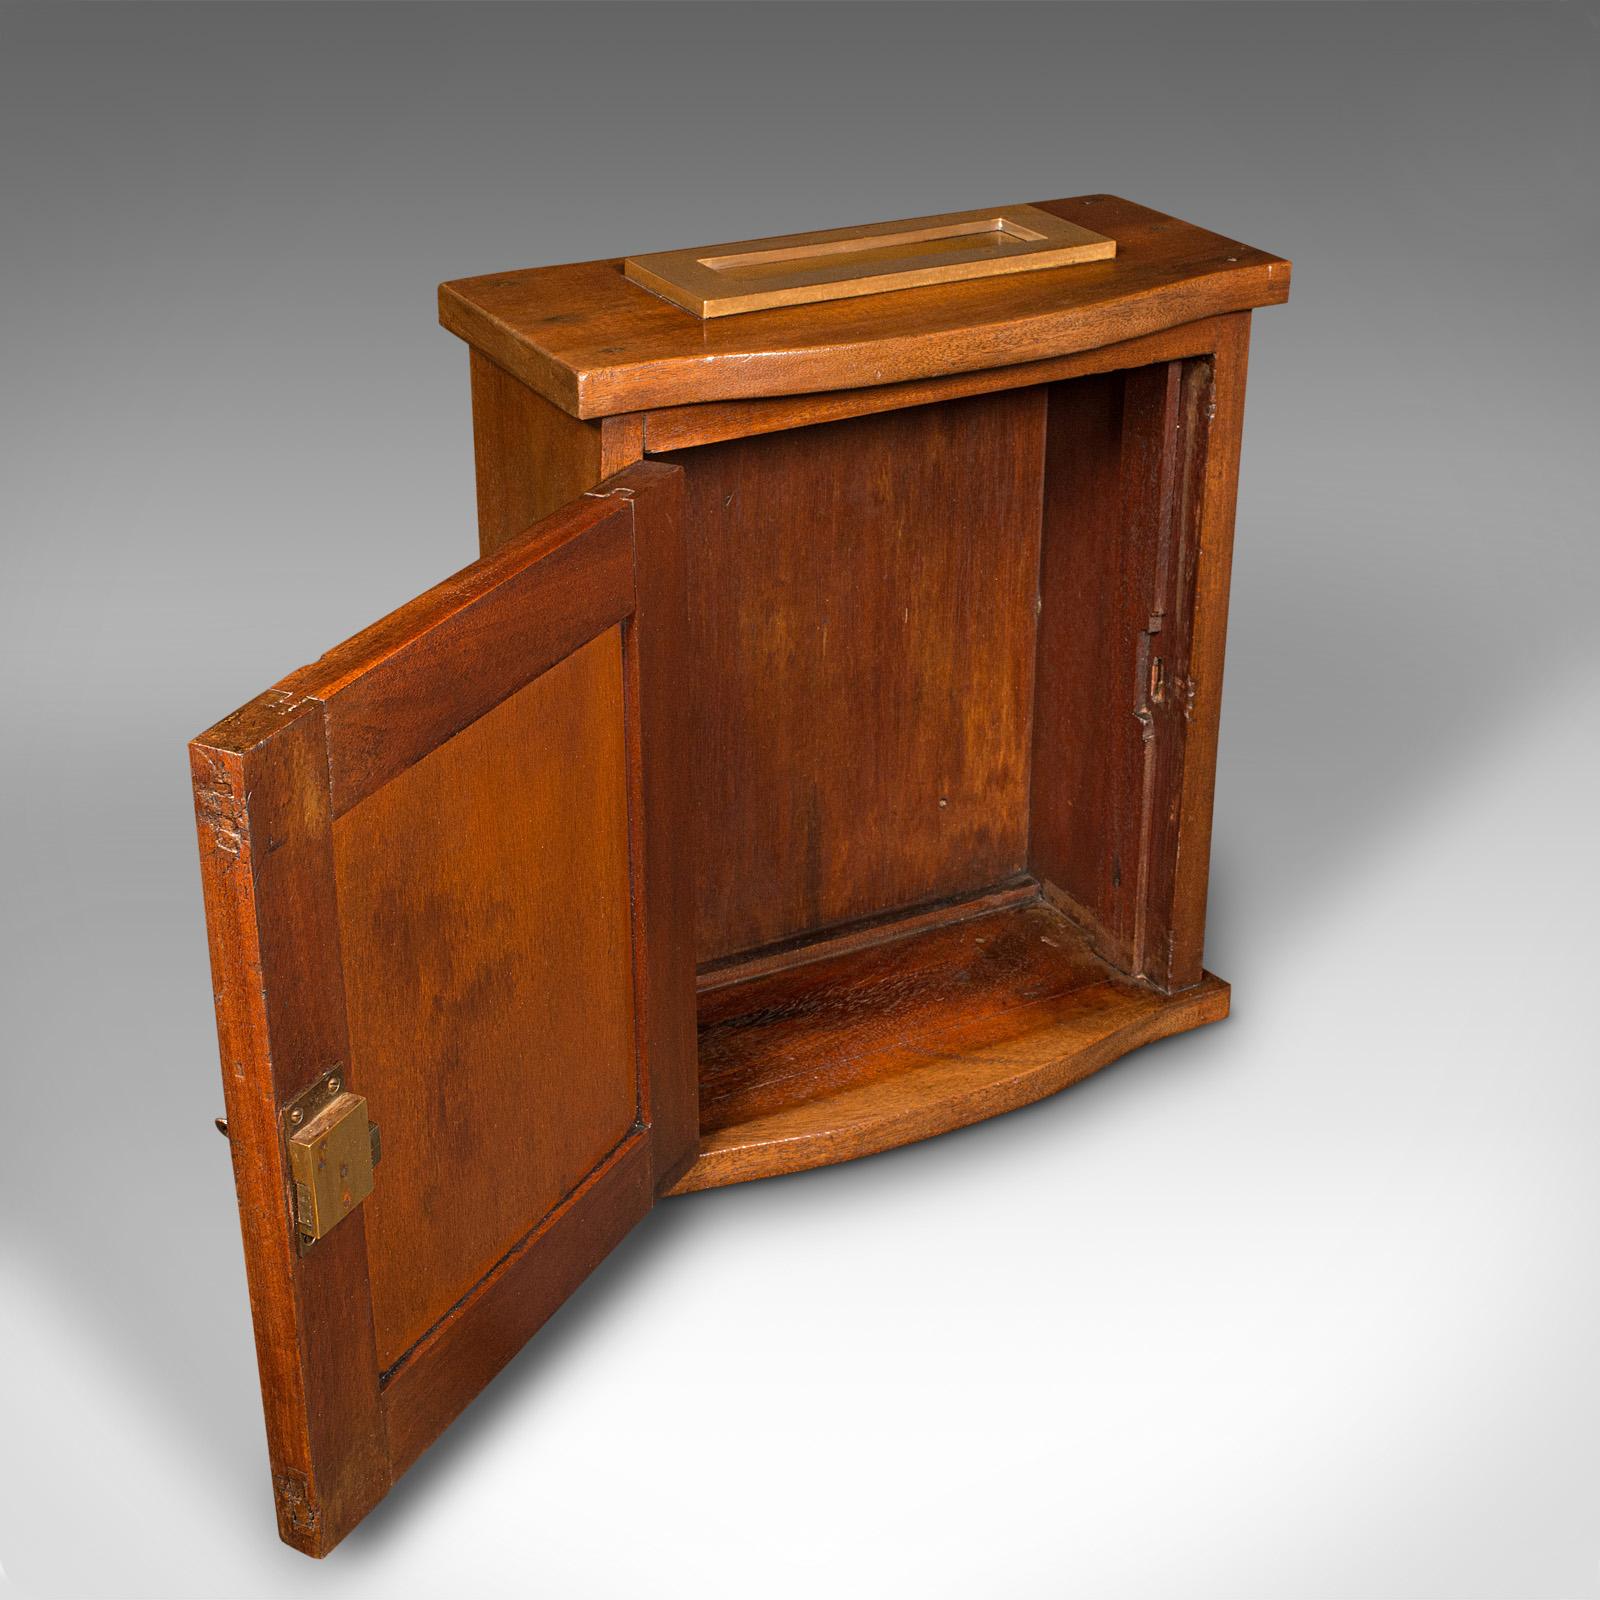 This is an antique country house hotel letterbox. An English, mahogany and brass countertop key box, dating to the Edwardian period, circa 1910.

Useful cabinetry, with a generous letterbox - ideal for a small hotel
Displays a desirable aged